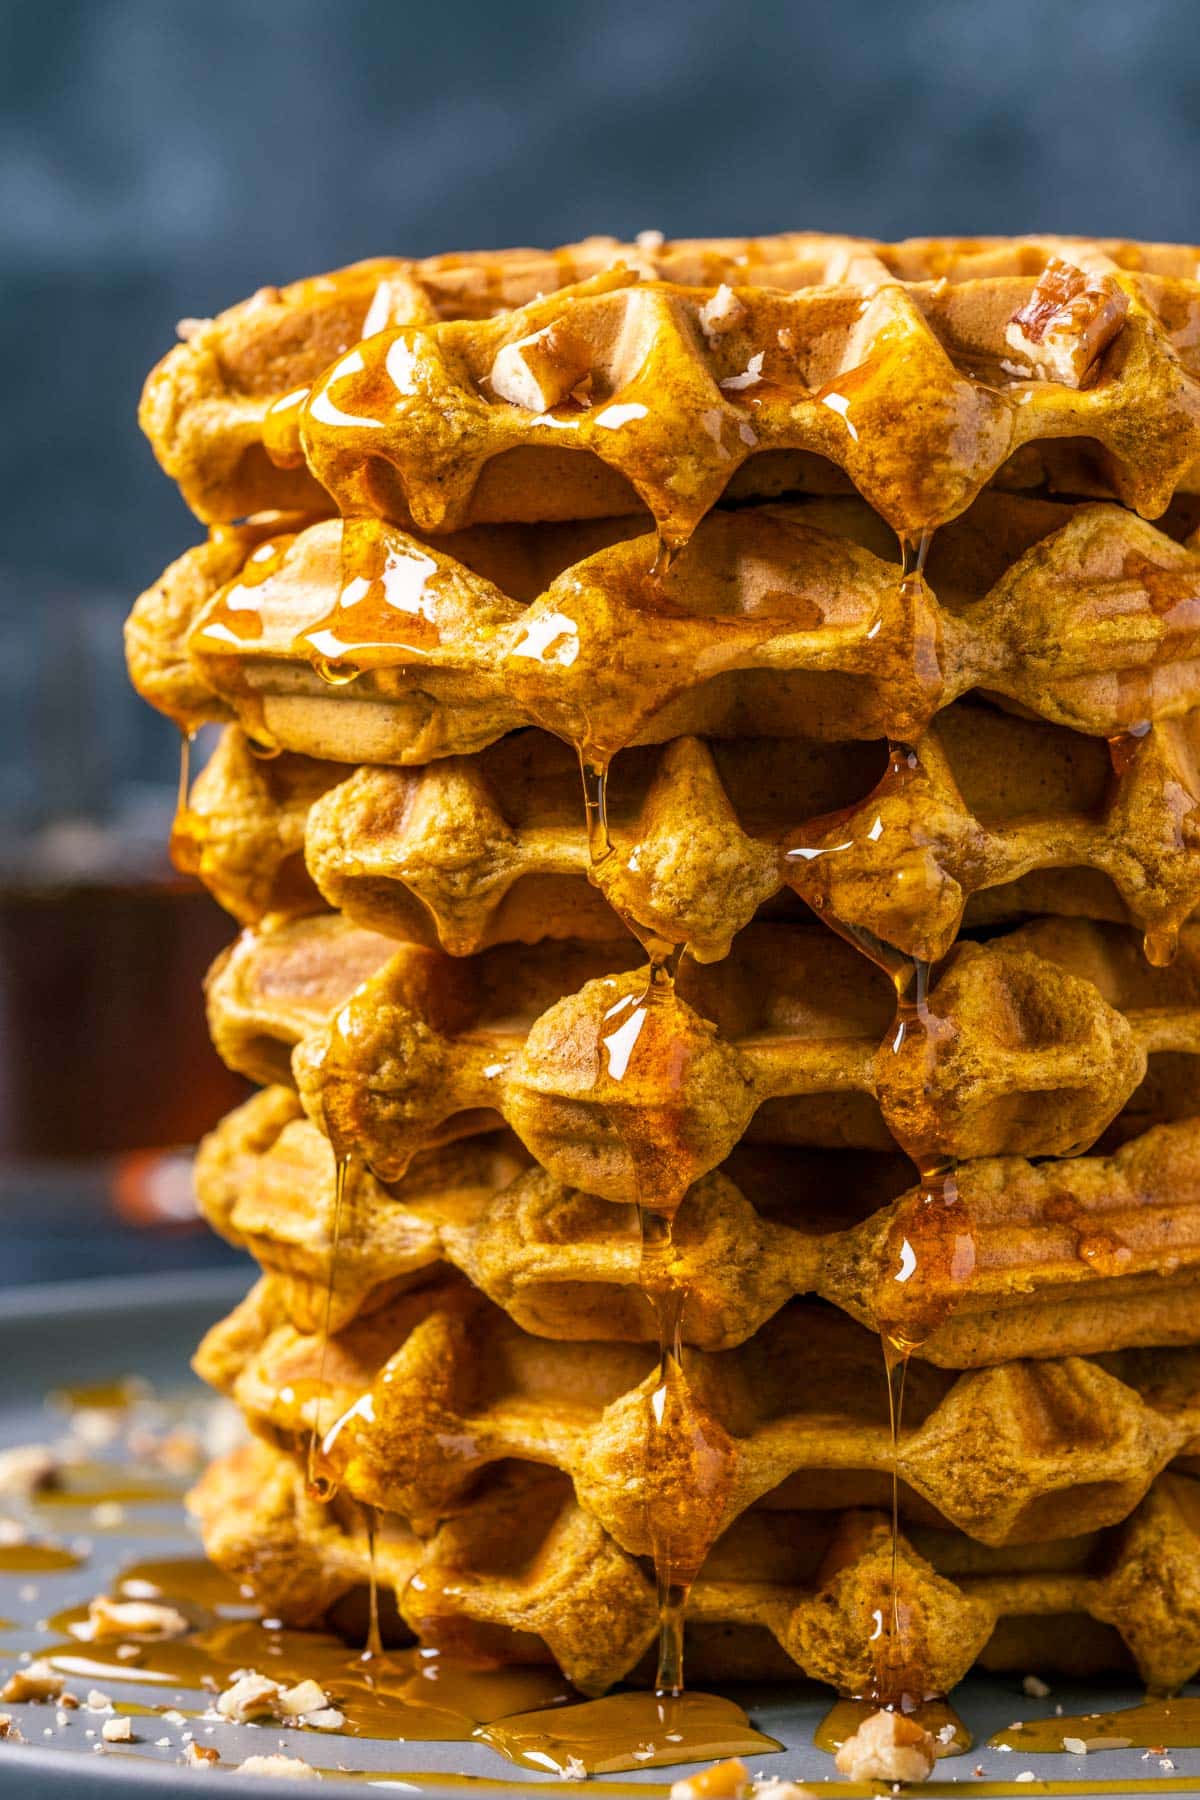 Stack of waffles on a gray plate.